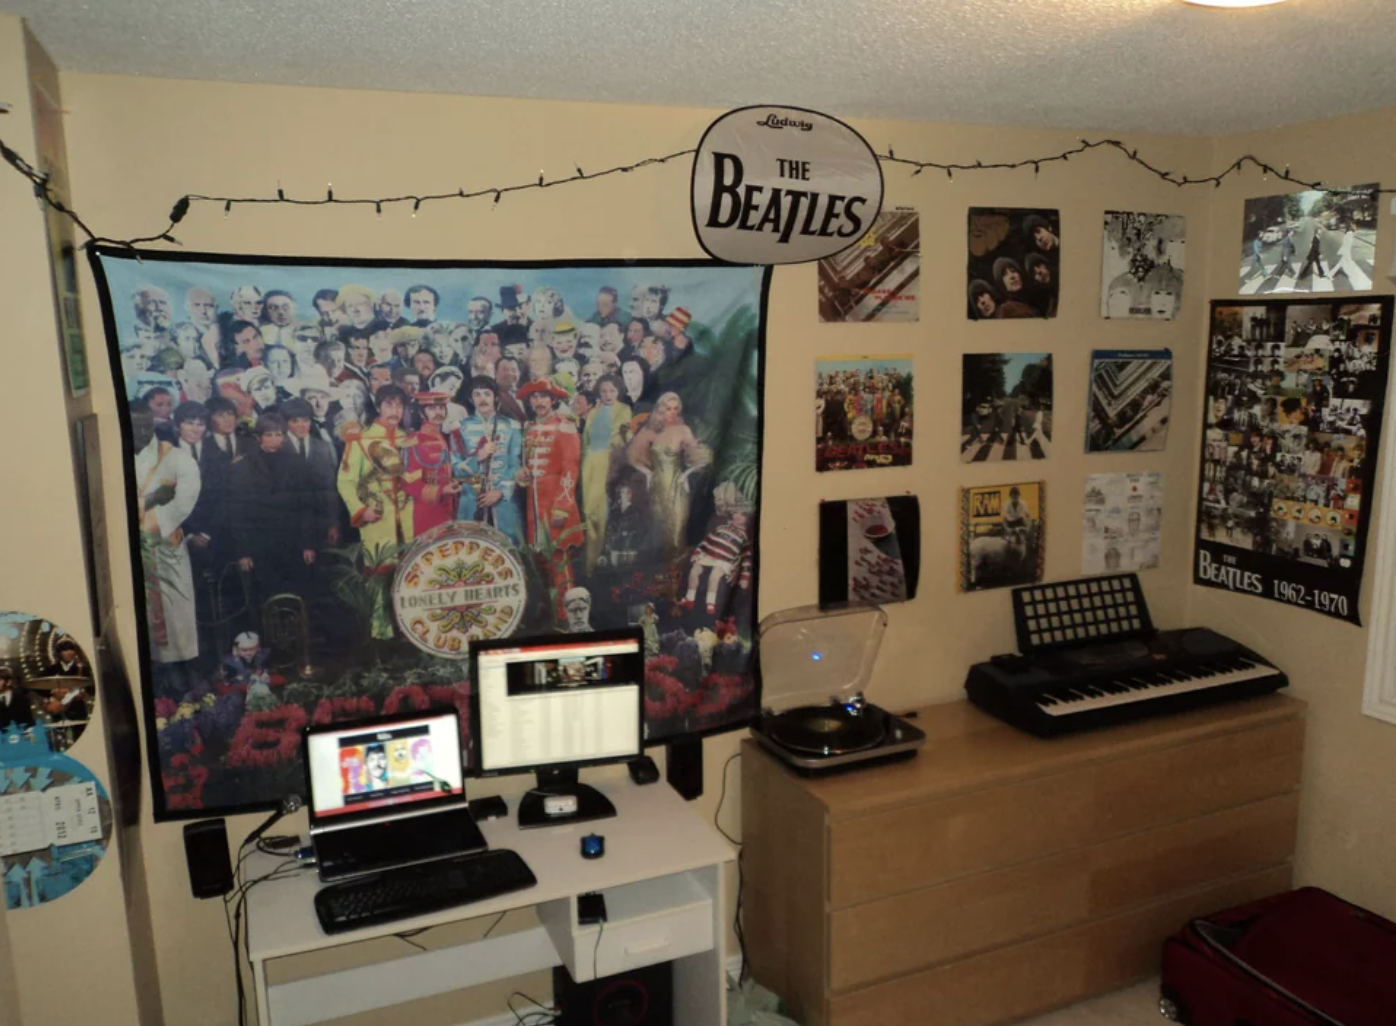 This room is inspired by the band, The Beatles and has a lot of Beatles memorabilia